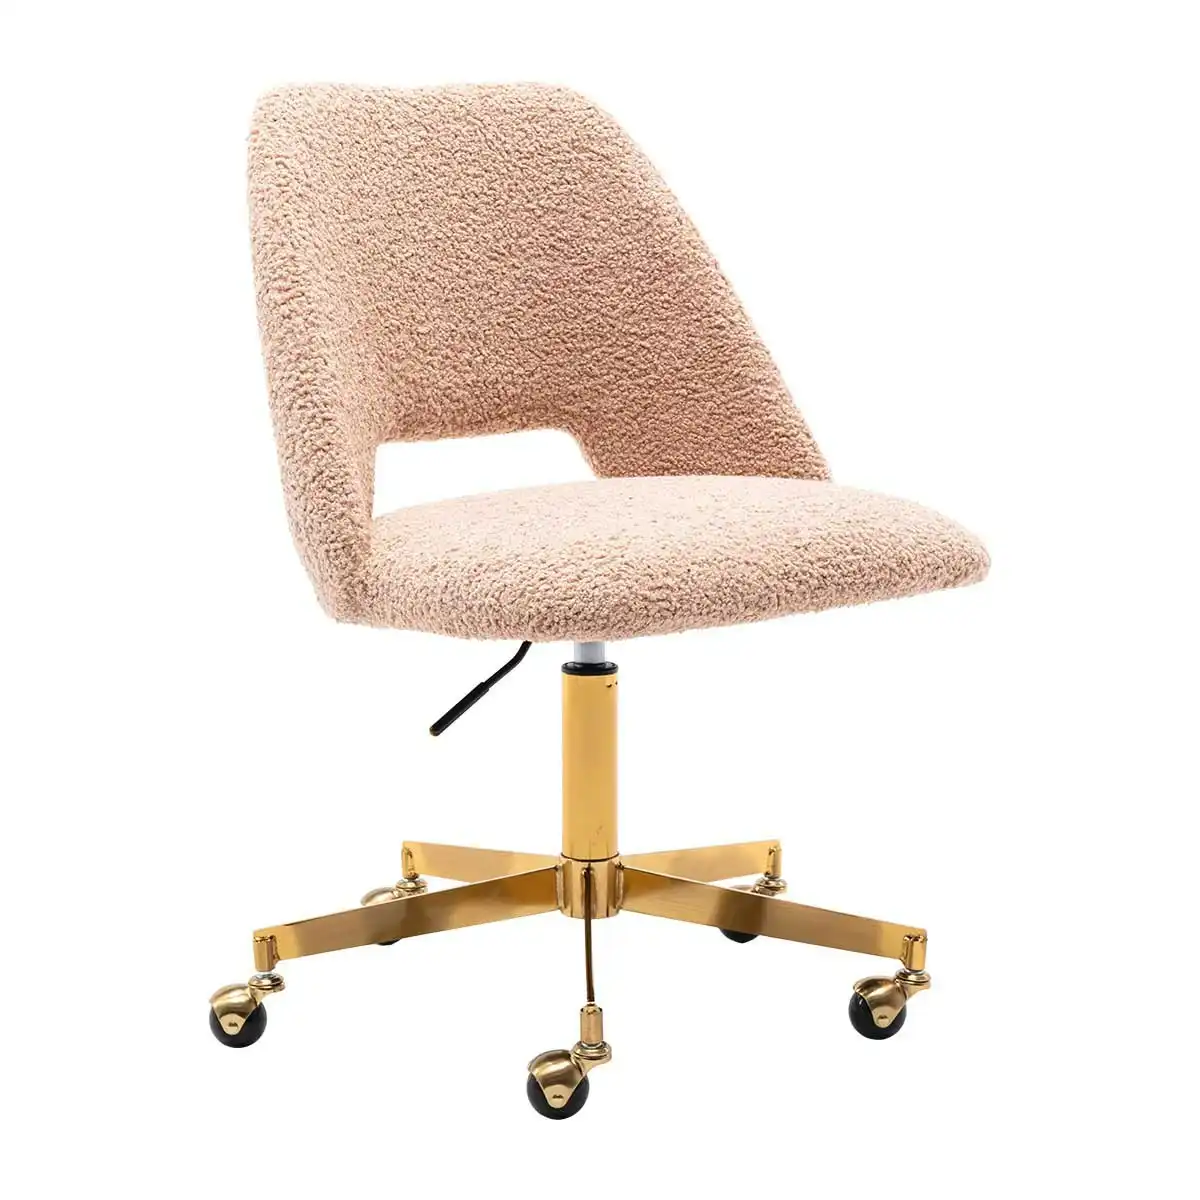 Belmont Fur Office Chair (Brushed Gold, Nude)